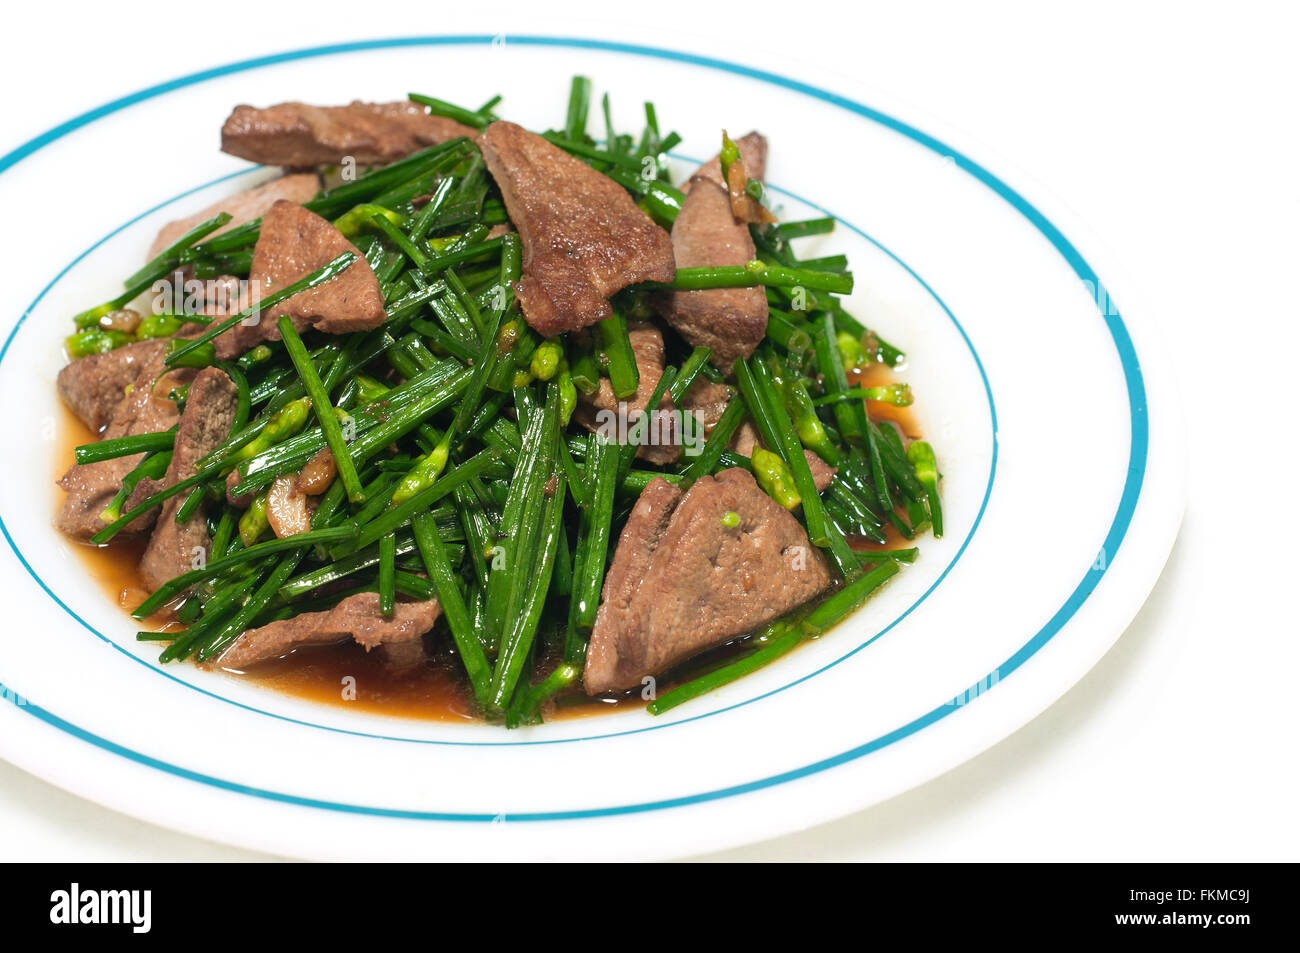 Stir-fried green Chinese chives with pork liver Stock Photo - Alamy